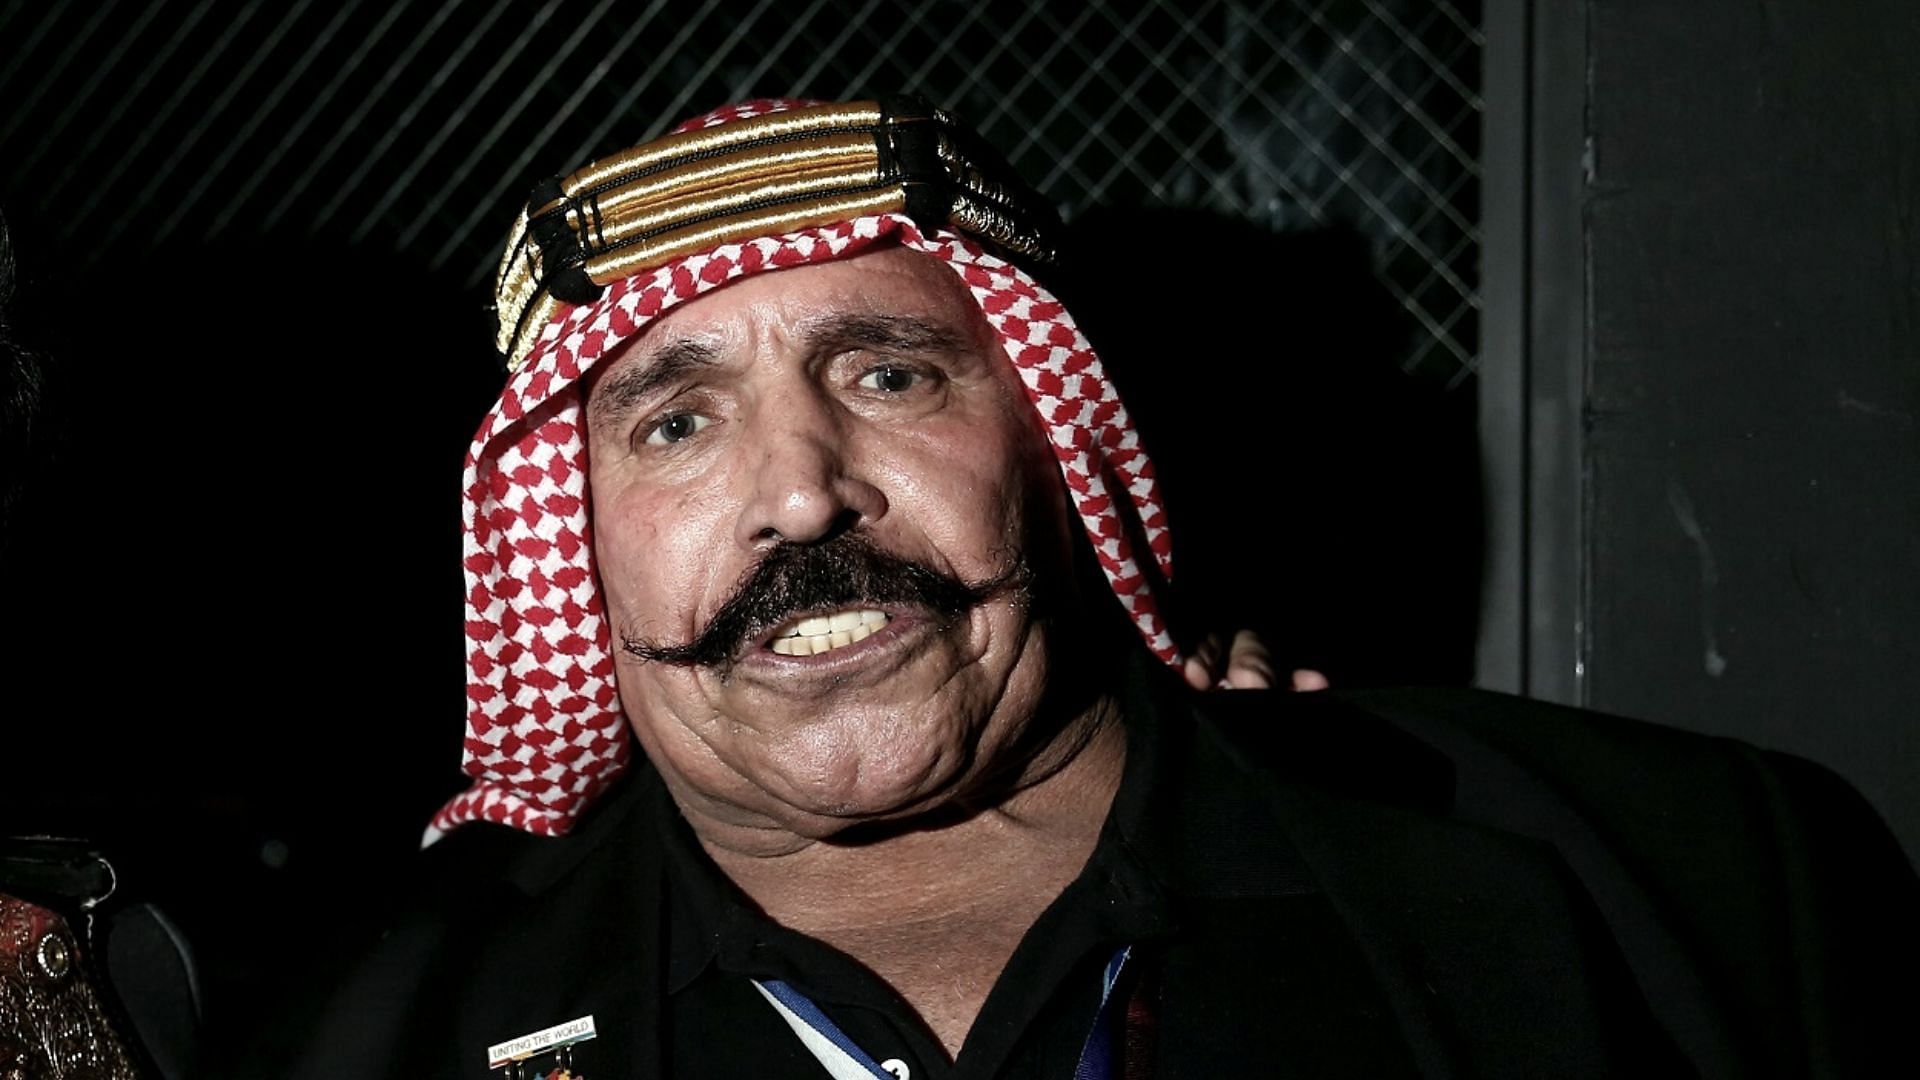 The Iron Sheik recently passed away